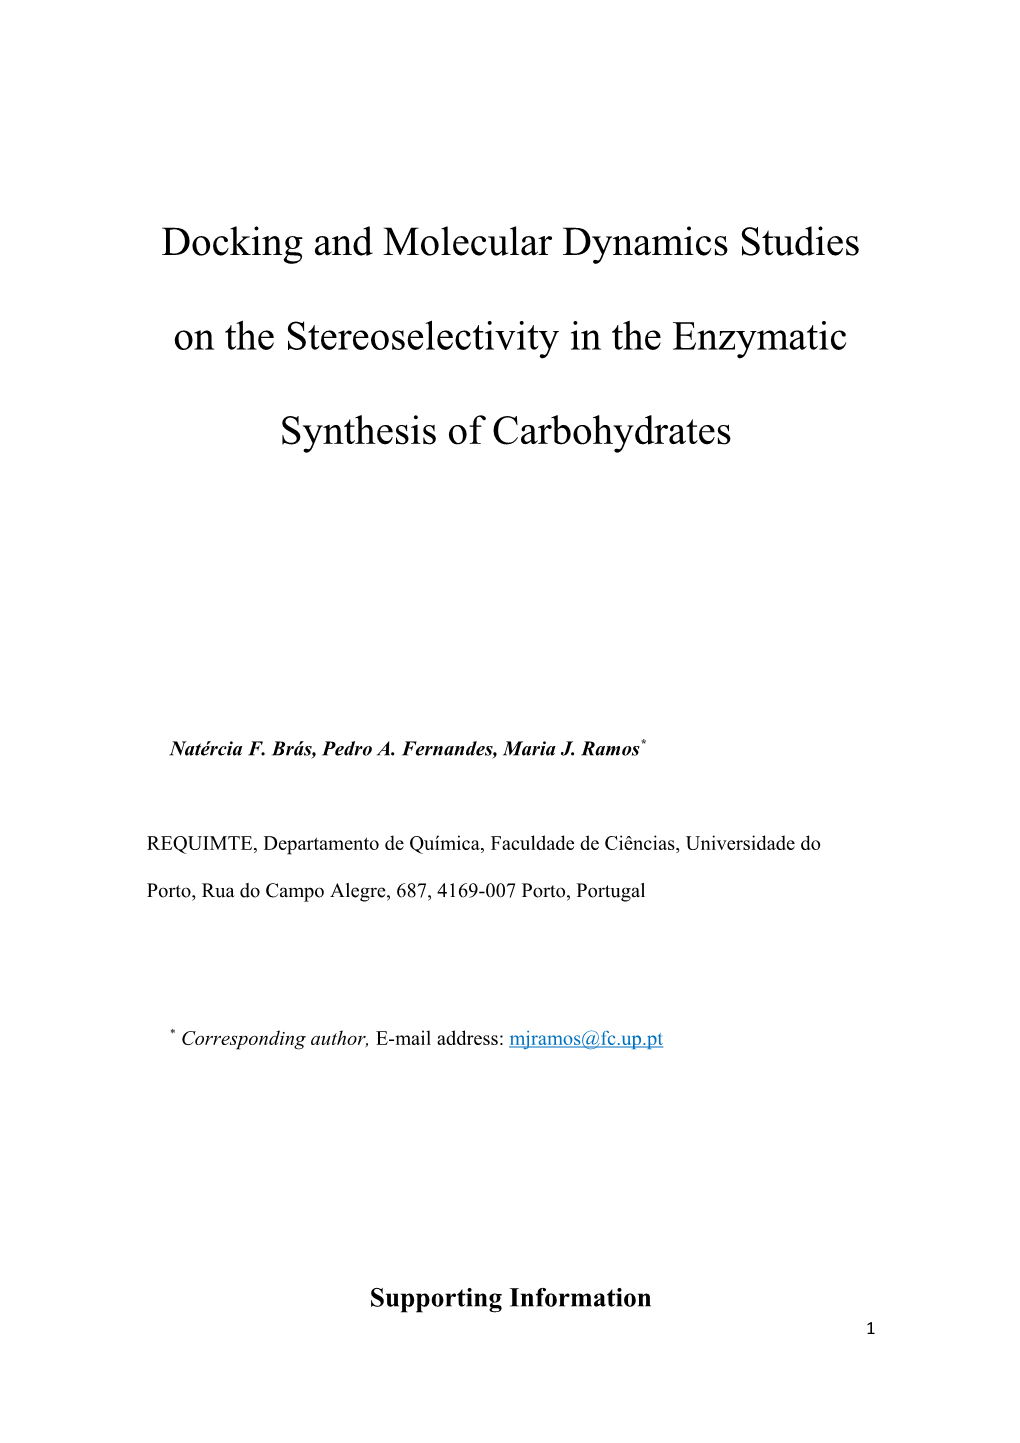 Docking and Molecular Dynamics Studies on the Stereoselectivity in the Enzymatic Synthesis